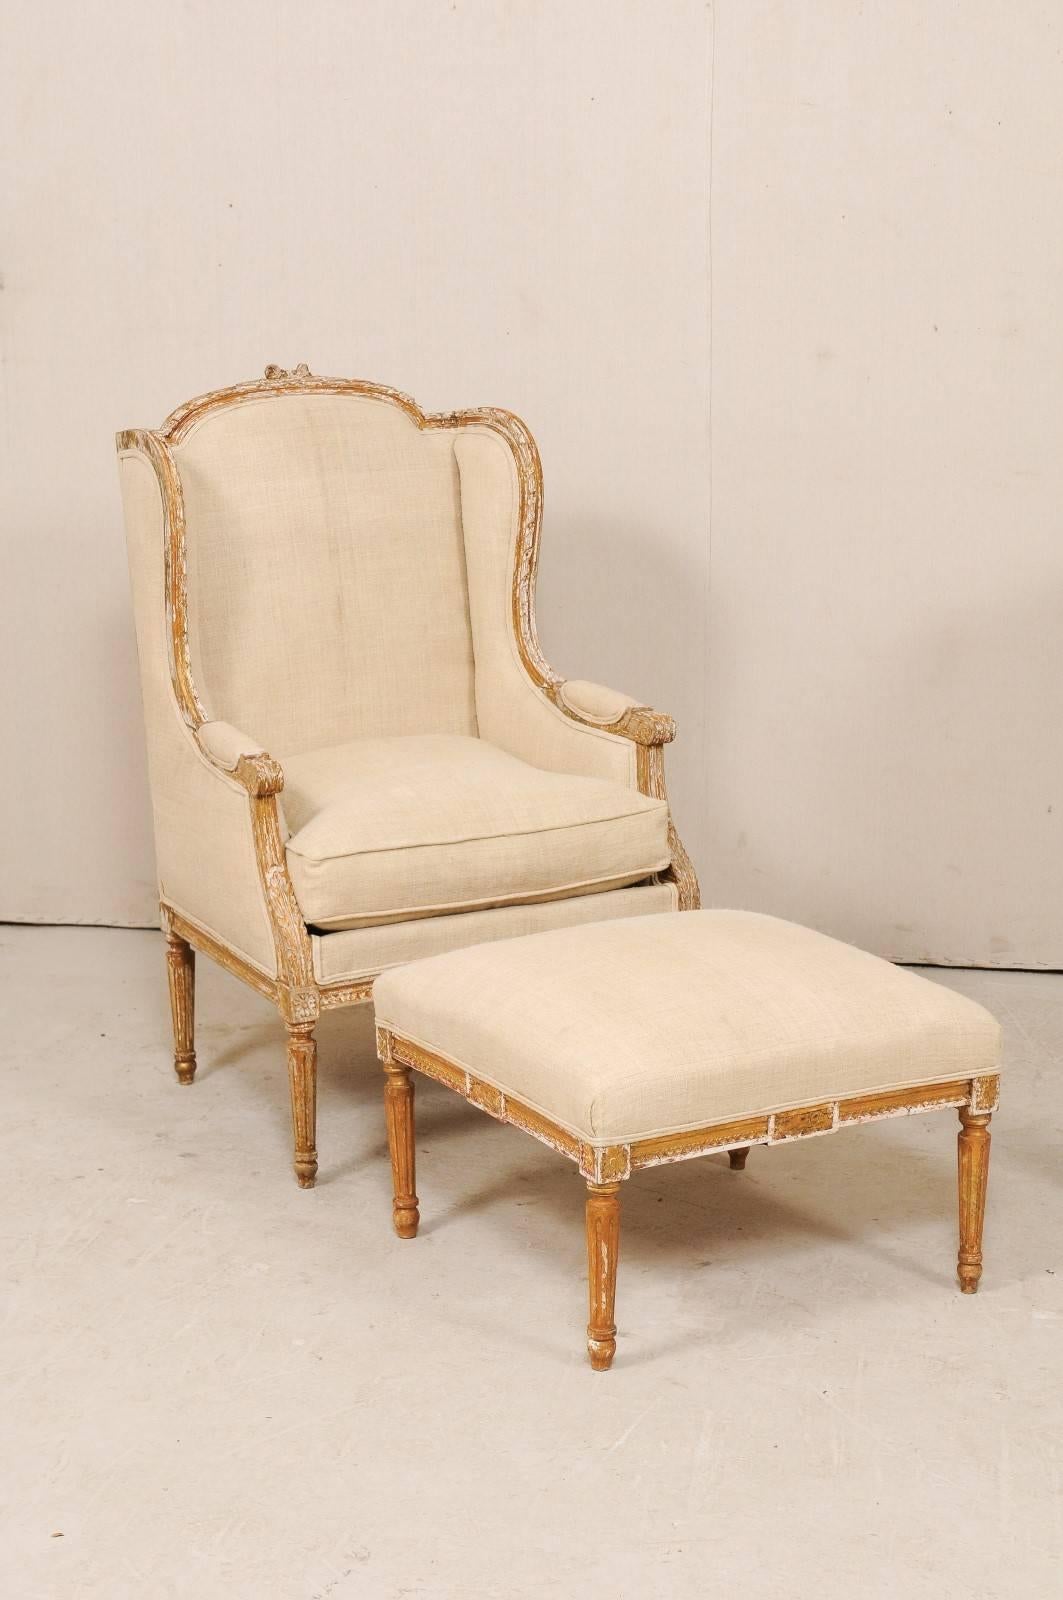 Carved Pair of French Louis XVI Style Wood Wing-Back Bergère or Armchairs with Ottoman